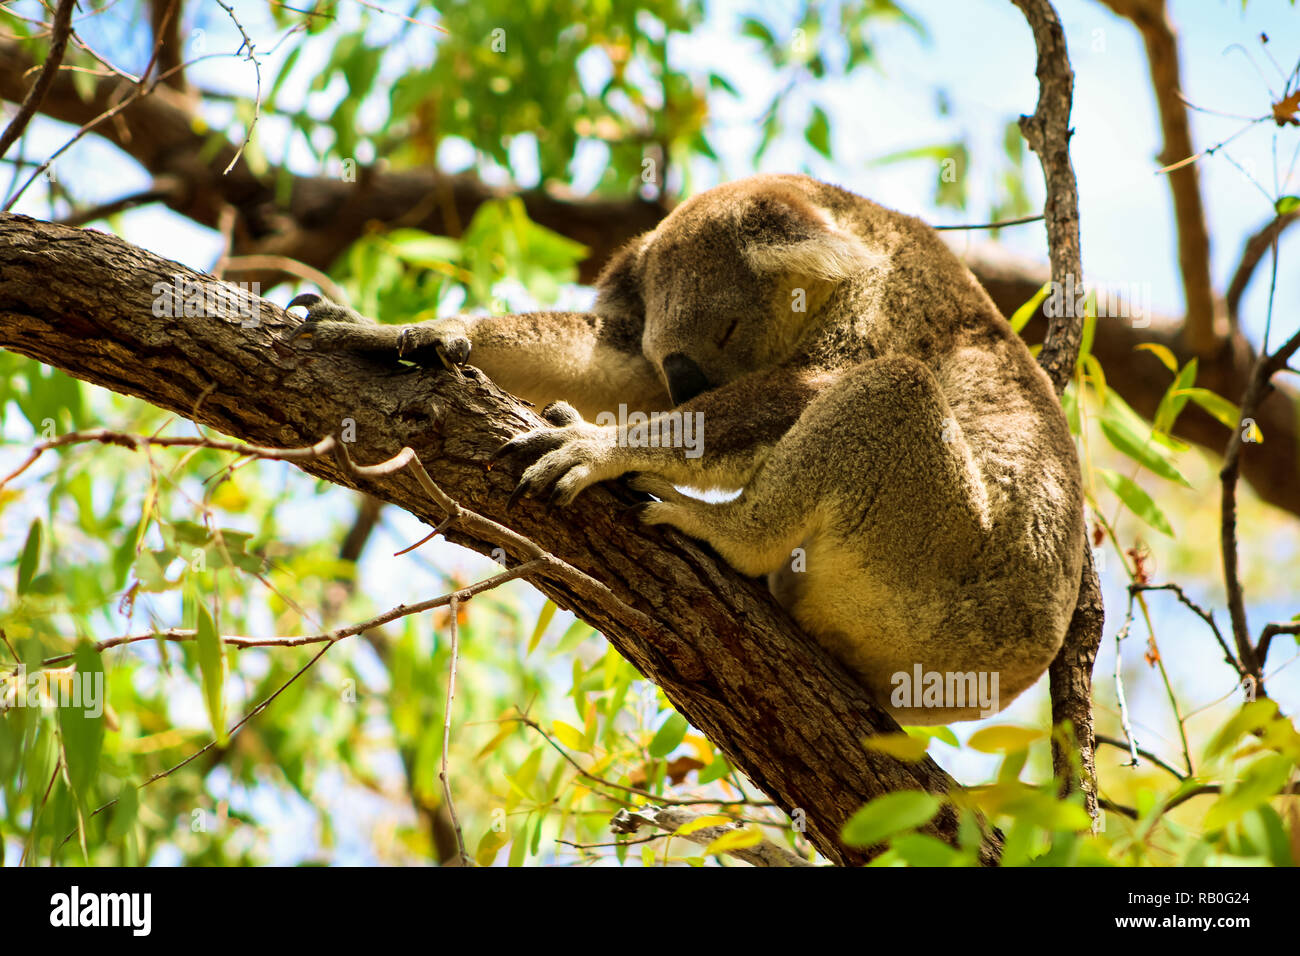 Sleeping Australian koala high up in a tree during spring time as spotted during a hike on Magnetic Island (Townsville, Queensland, Australia) Stock Photo